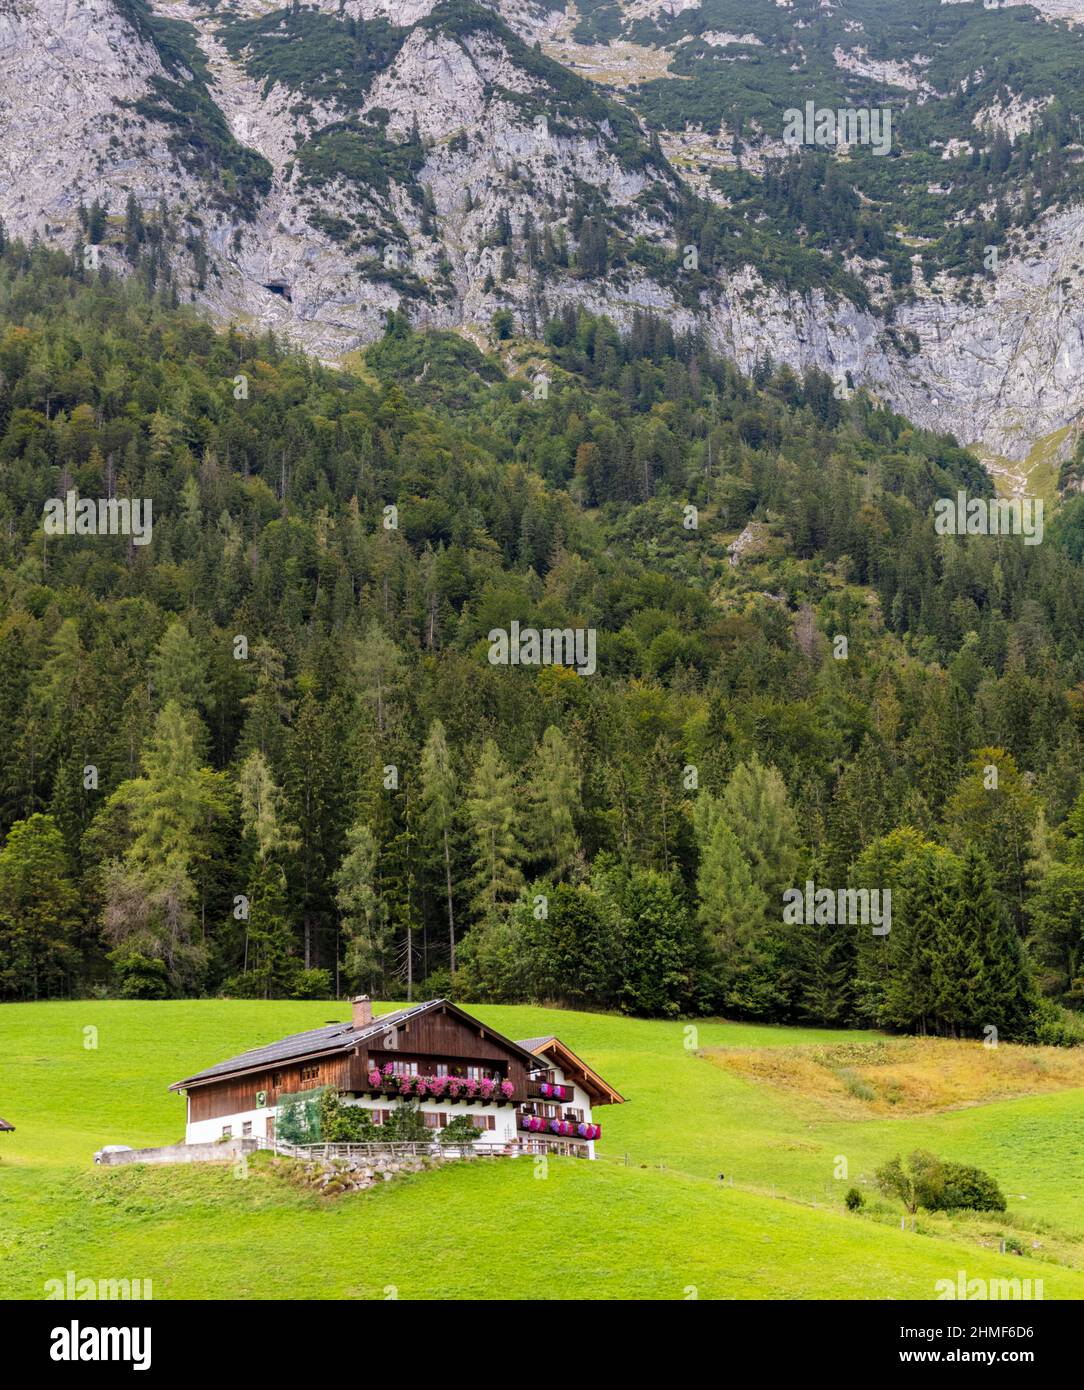 Farm with holiday flats in Berchtesgadener Land, Berchtesgaden, Germany Stock Photo